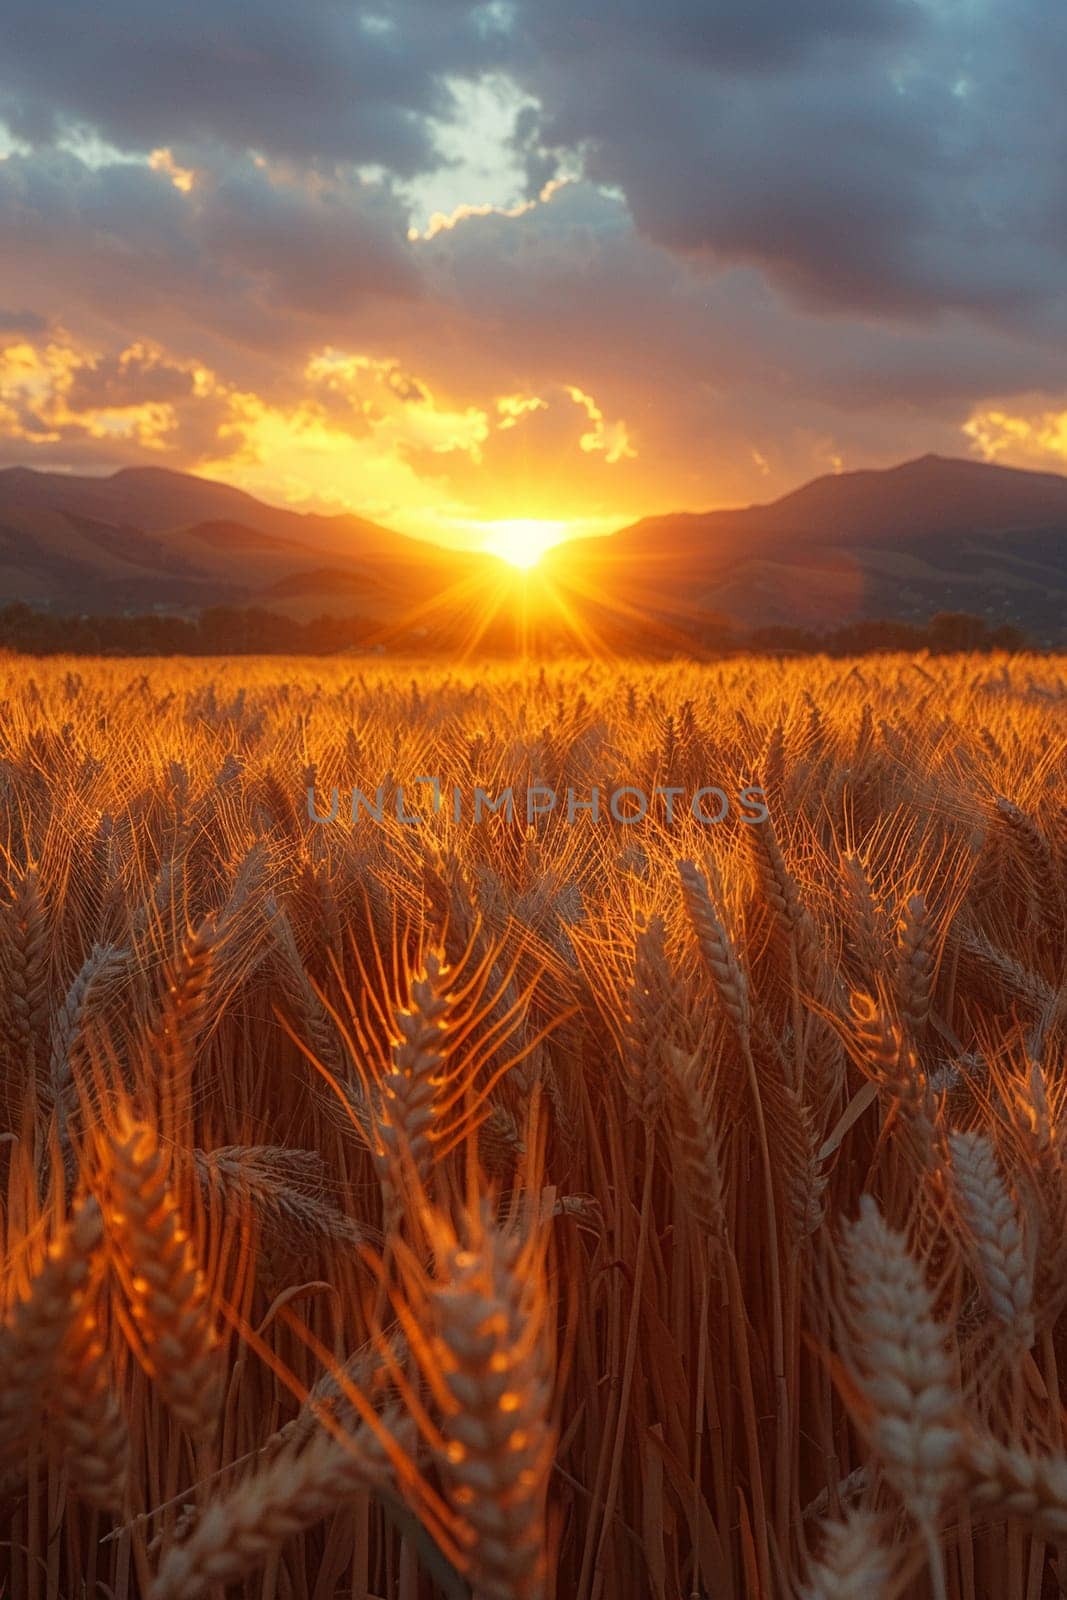 Waves of grain in a field at sunset, symbolizing abundance and the natural world.